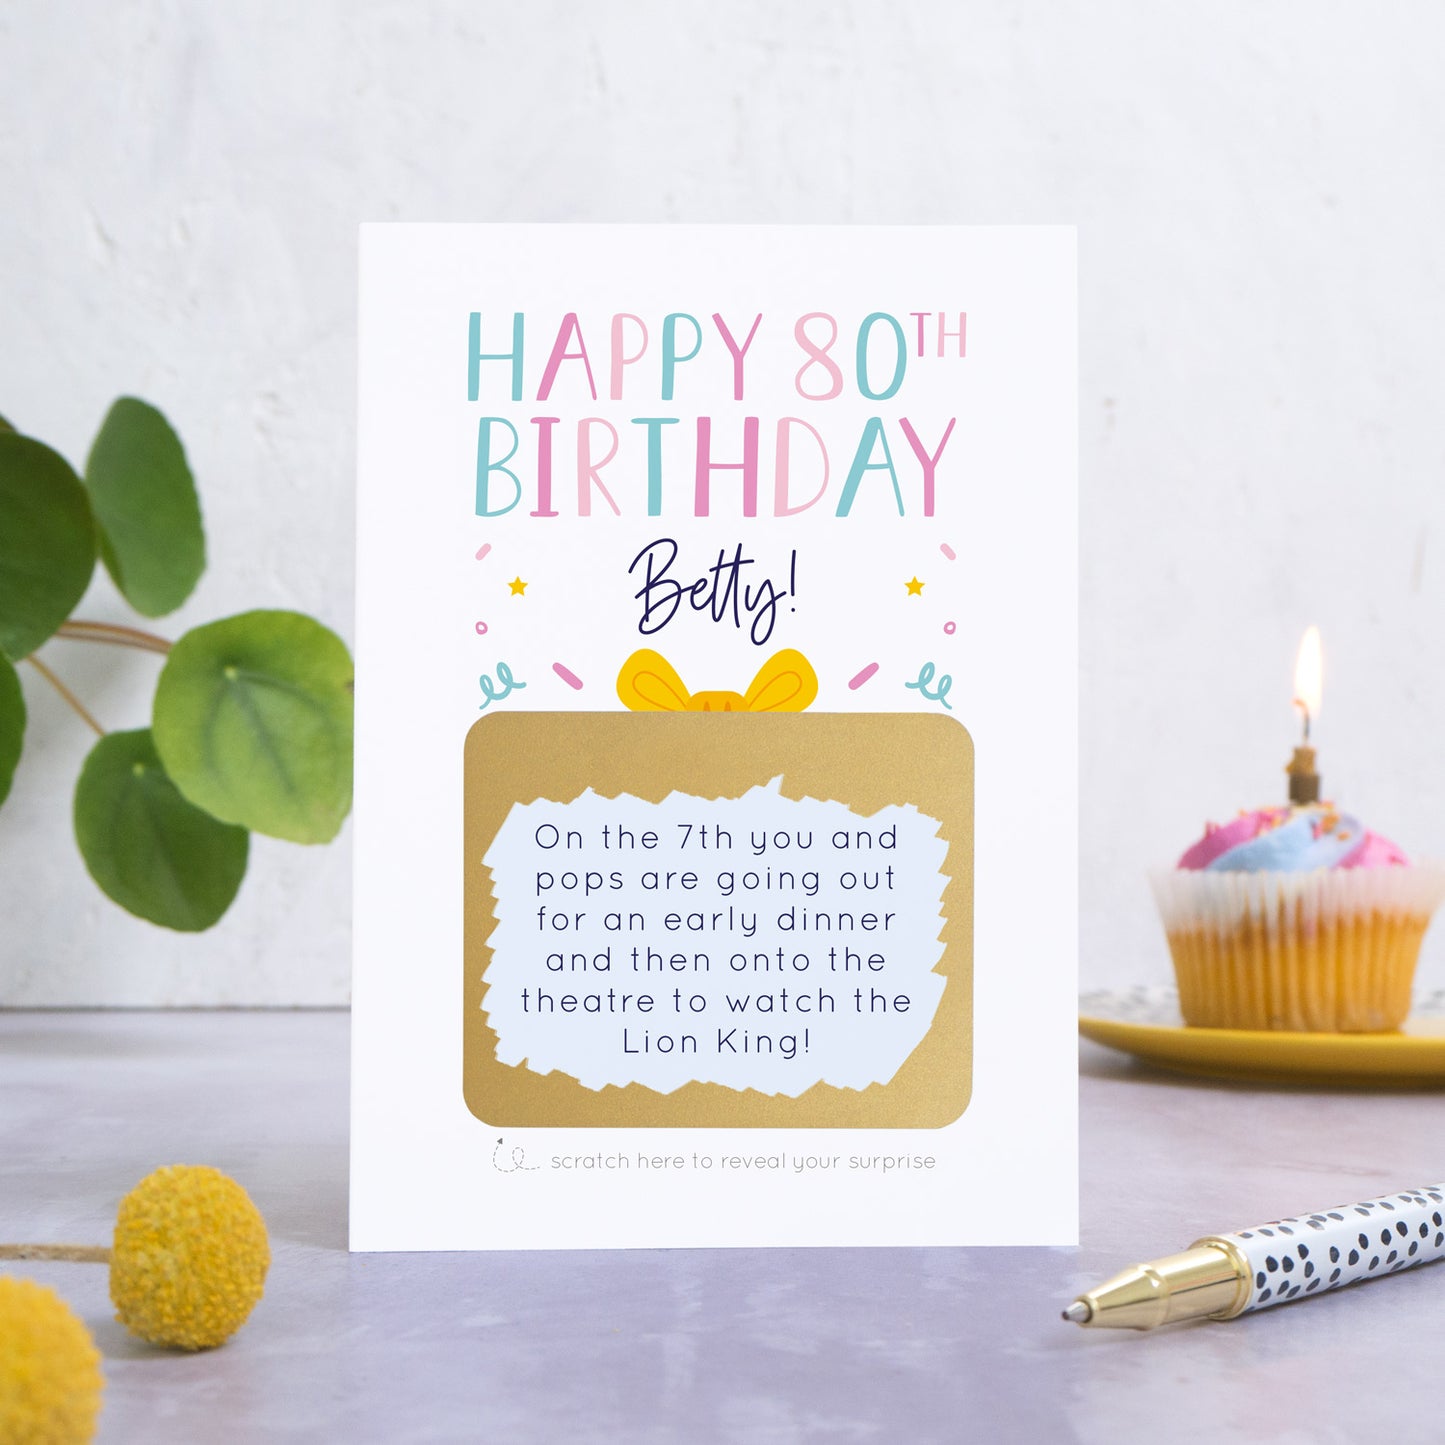 A personalised happy 80th birthday scratch card in pink that has been photographed on a white and grey background. There is foliage and yellow flowers on the left and a cupcake and a pen to the right. The card features the recipients name and a scratch panel that has been scratched off revealing a personalised message.